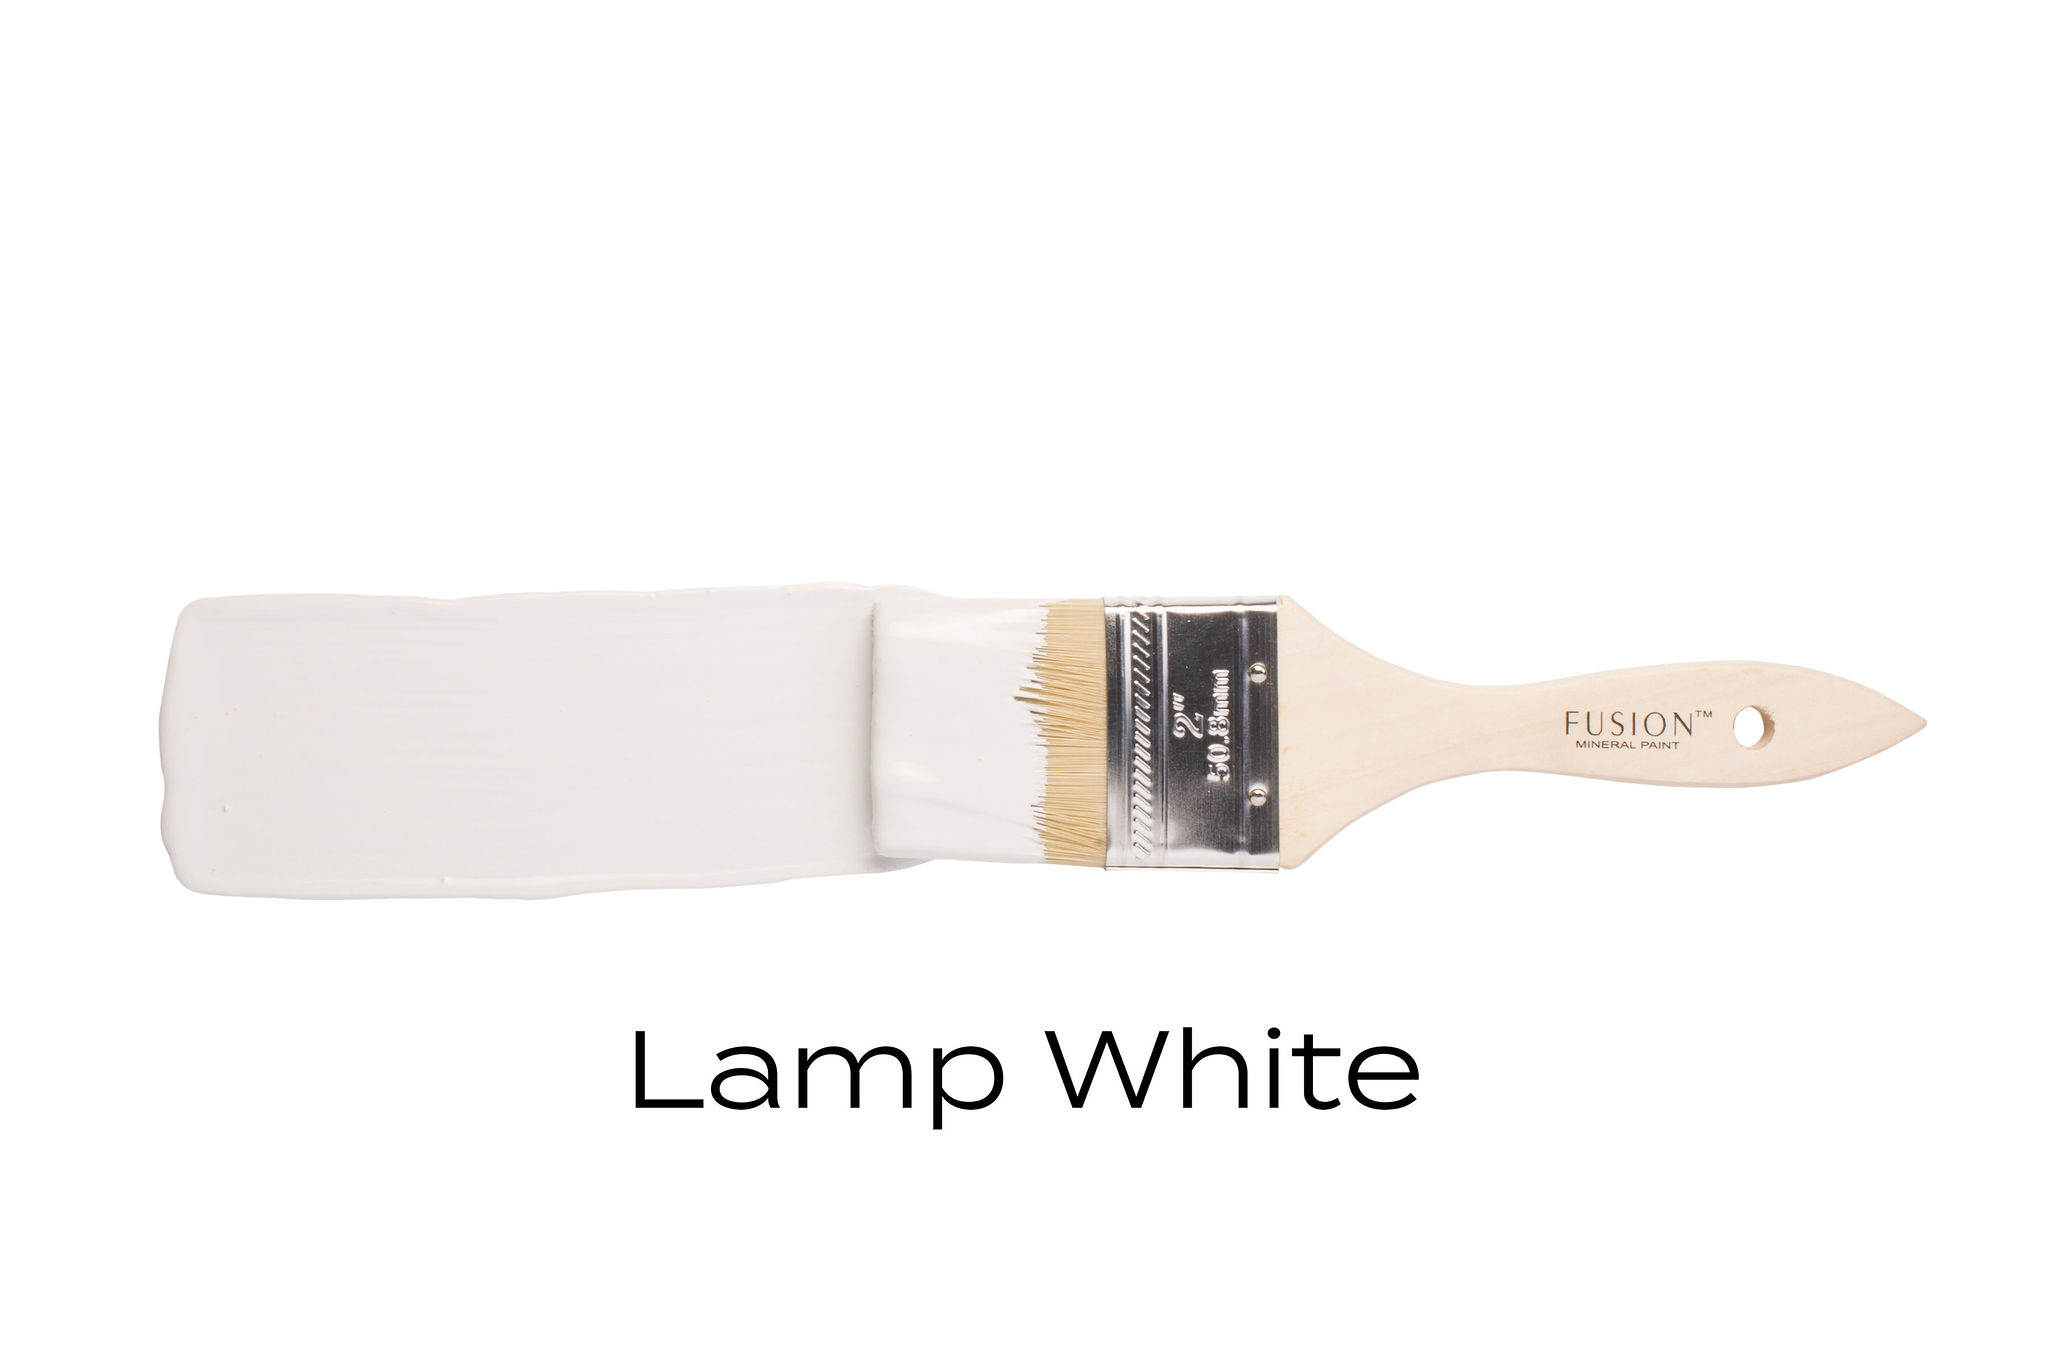 Lamp White Fusion Minerail paint Goed Gestyled Brielle